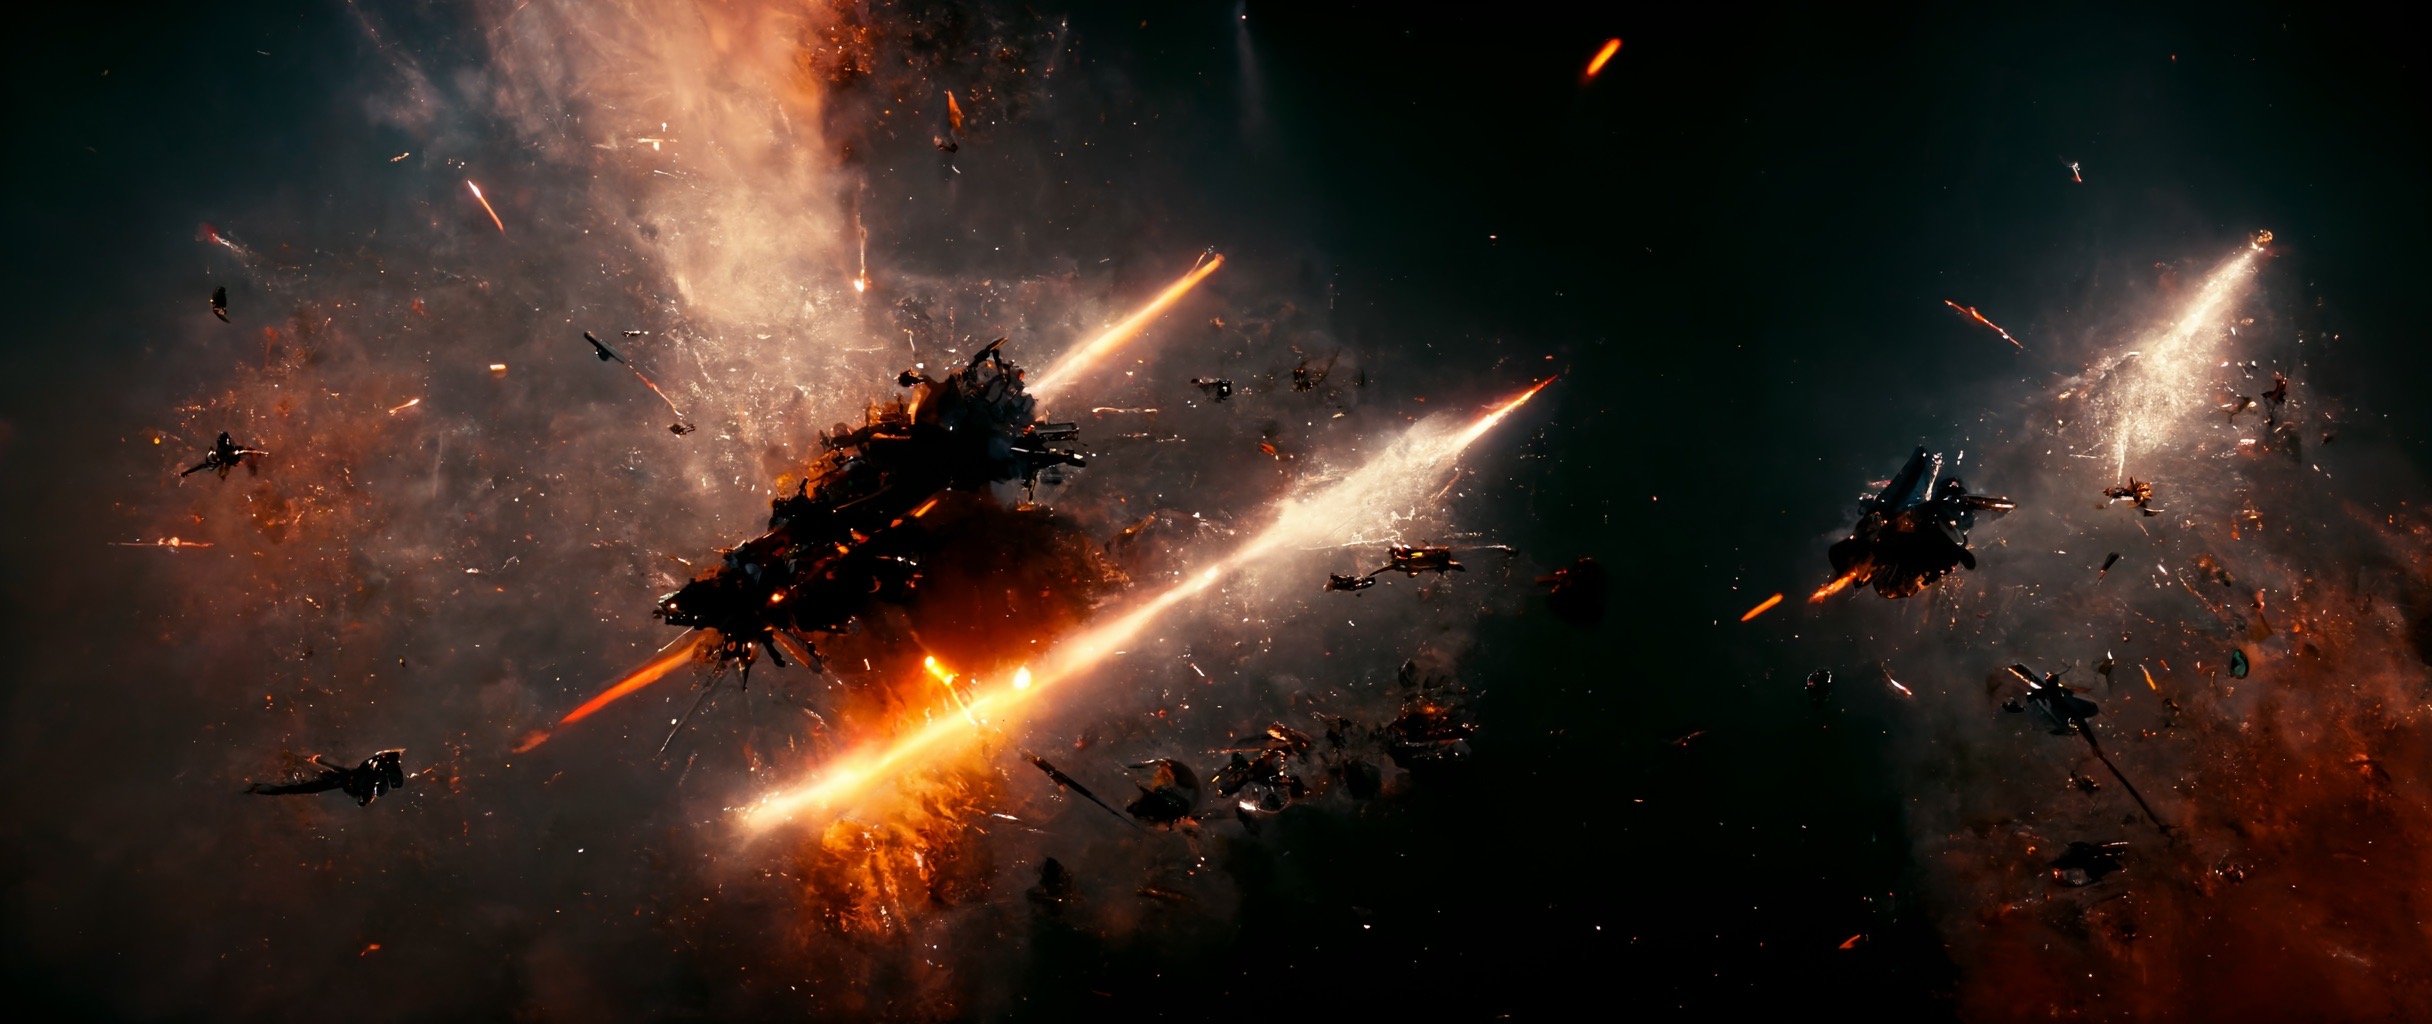 ecaa6329-809b-4dca-82d2-dab3f55d82dd_S3RAPH_two_large_spaceships_crashing_into_each_other_explosions._Epic_dark_space_background._cinematic_comp.JPG